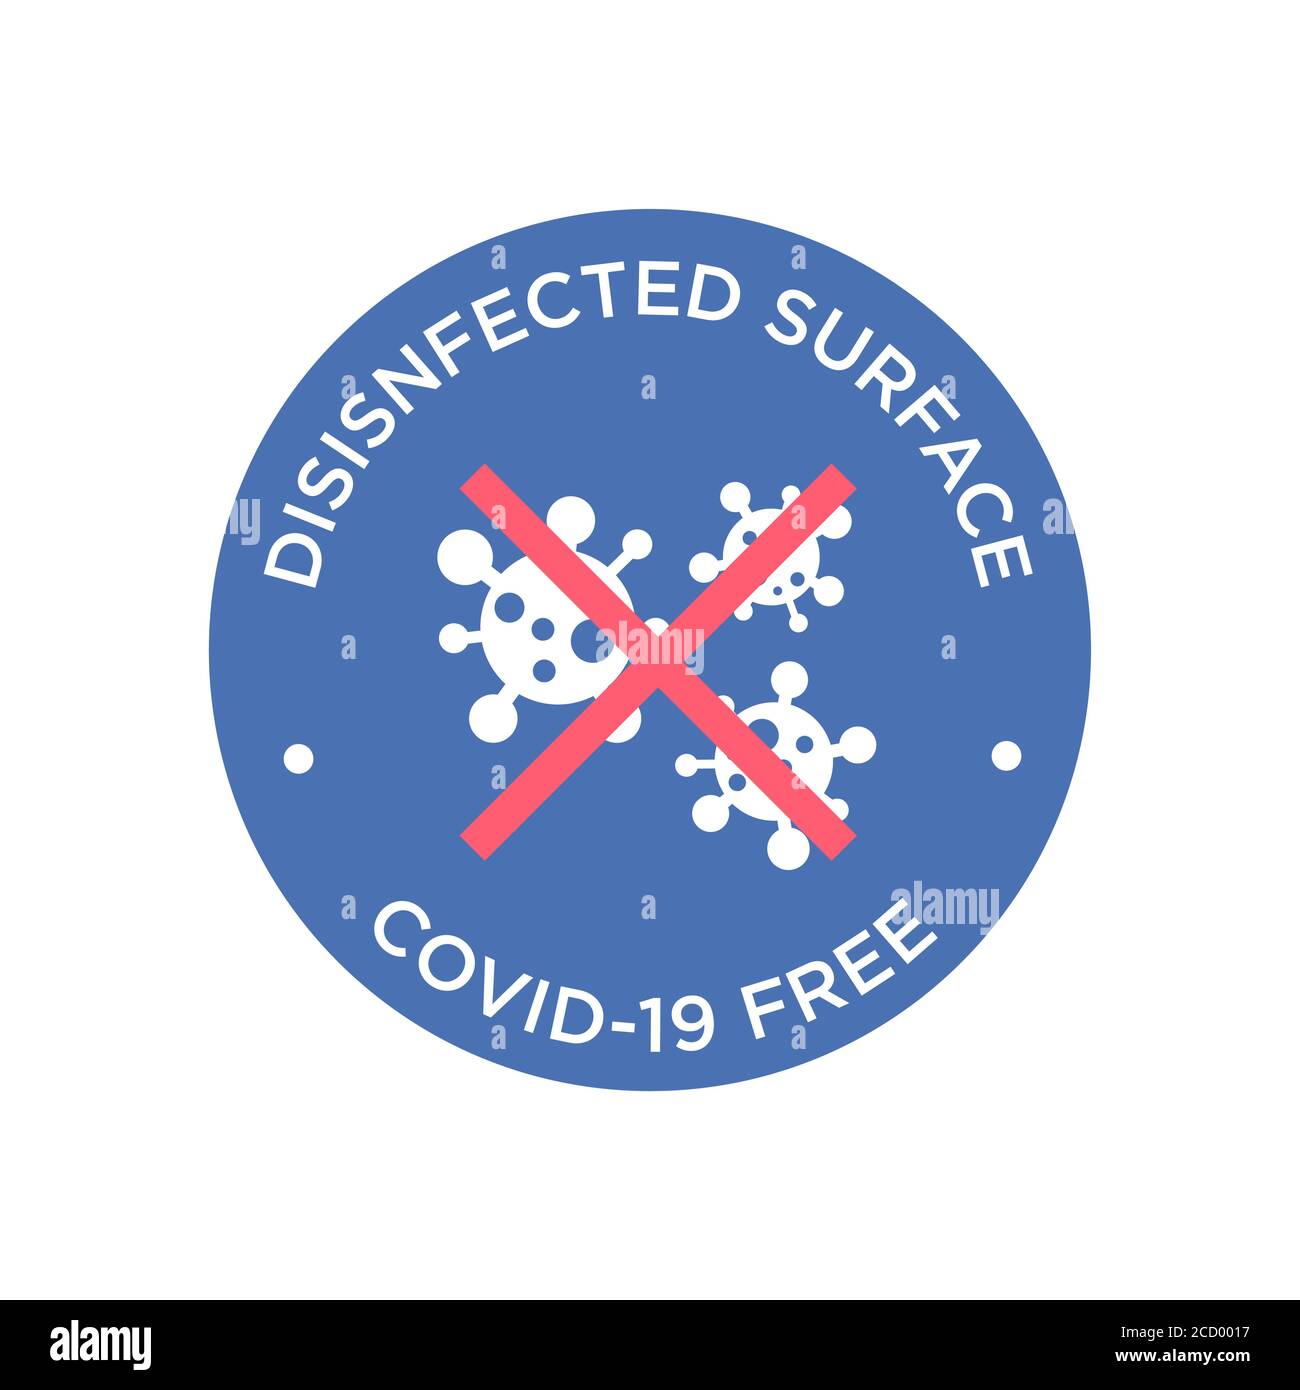 Coronavirus disinfected surface icon. Round symbol for clean areas of Covid-19. Covid free zone. Stock Vector